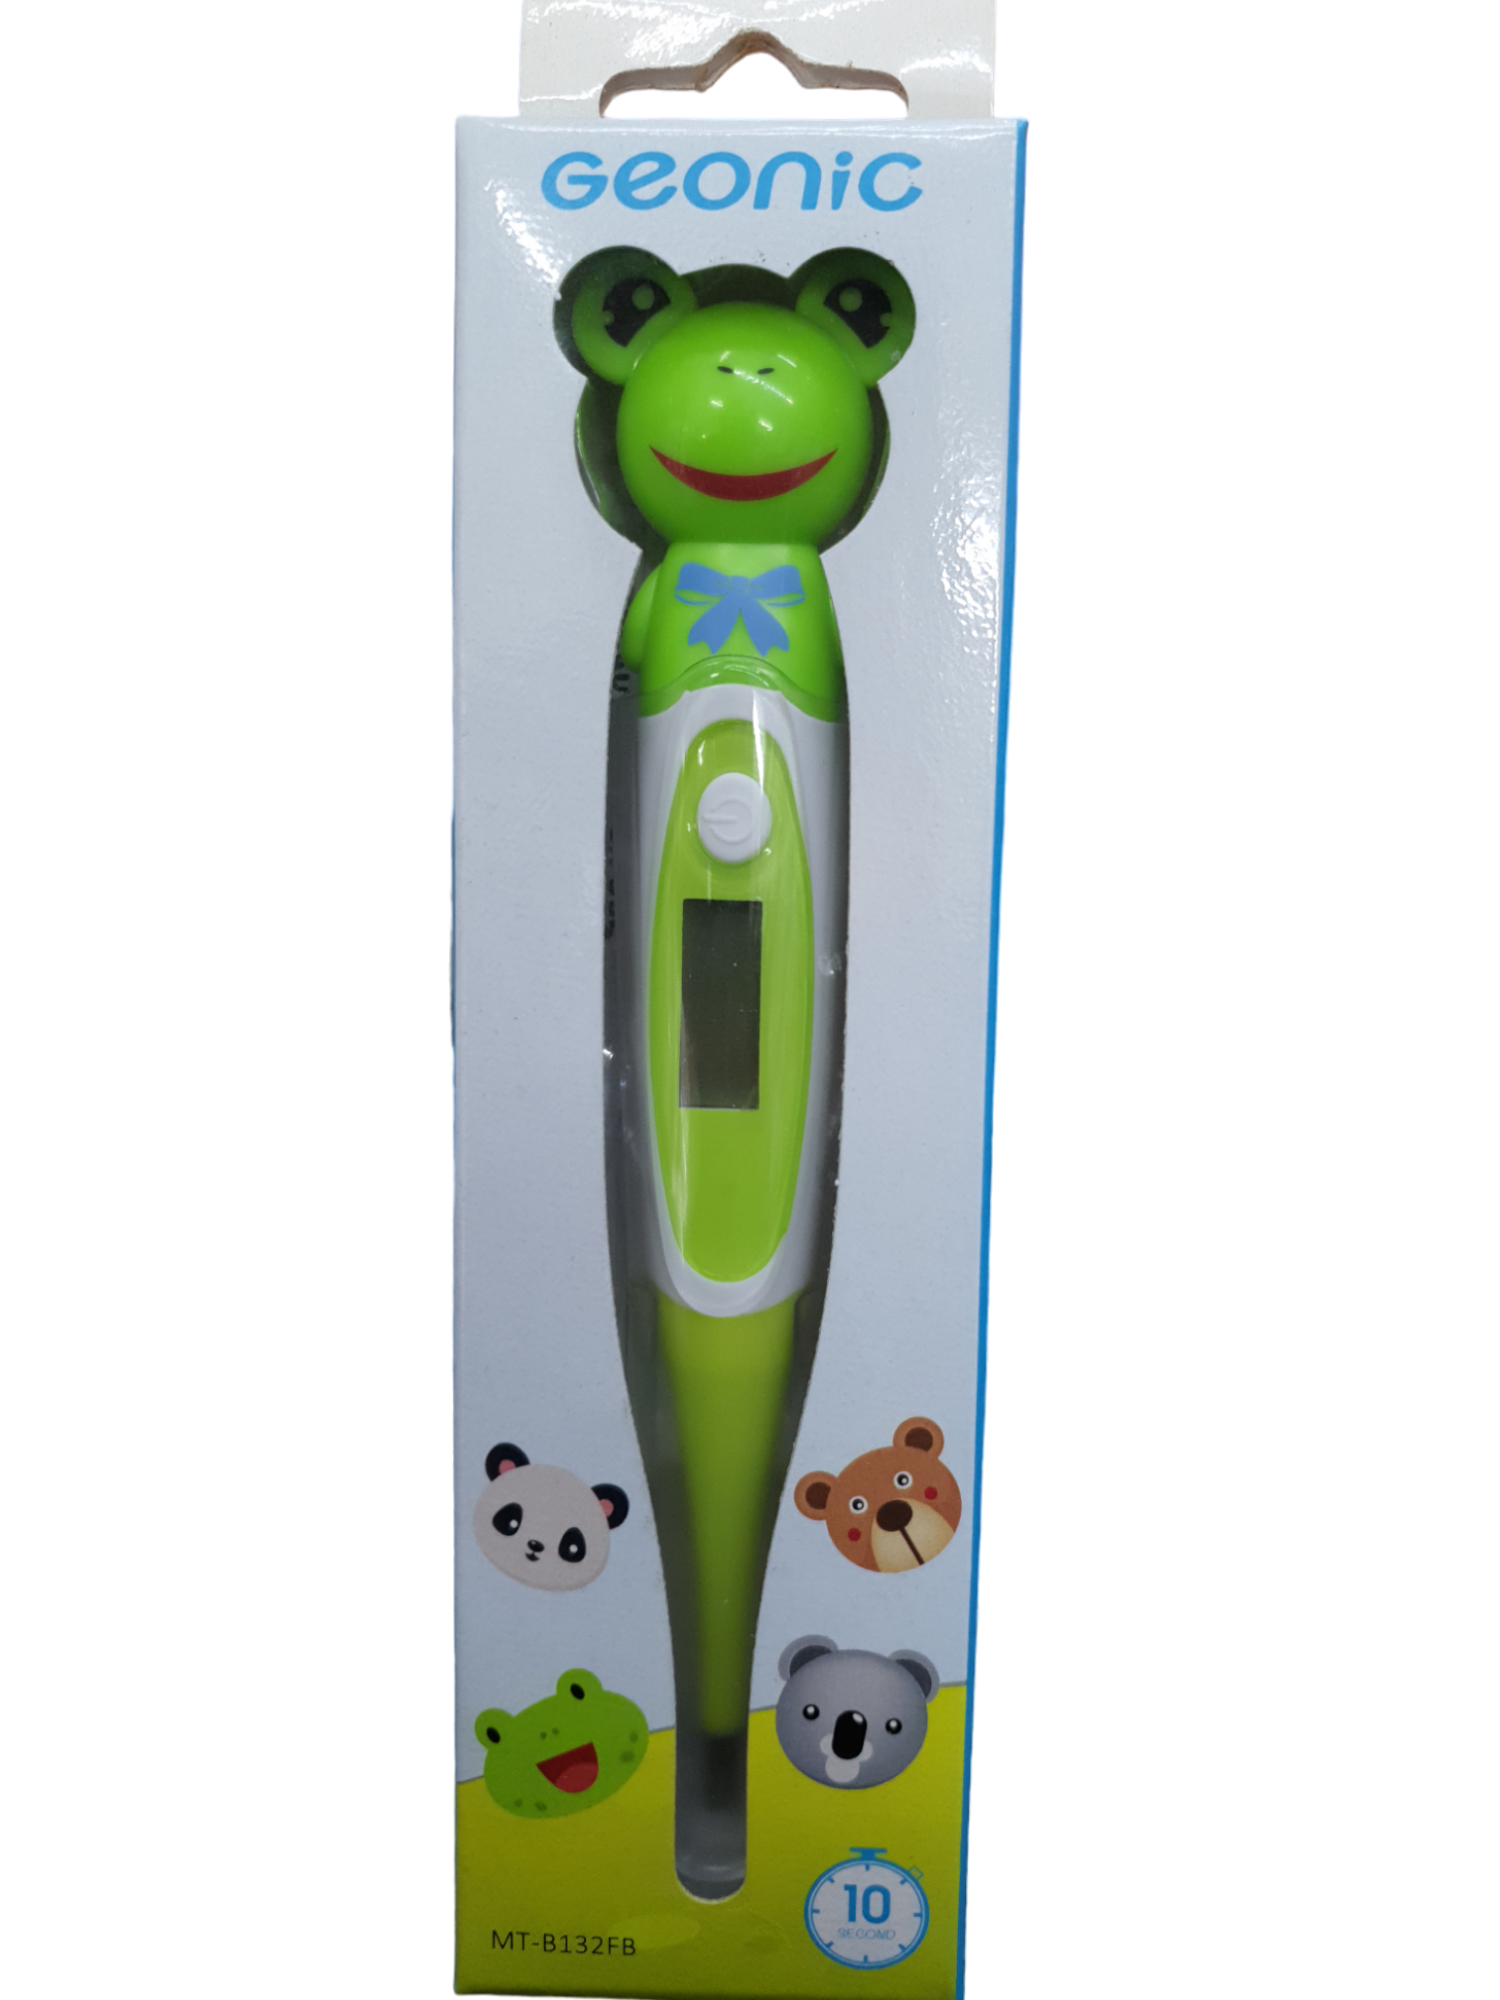 GEONIC CUTE ANIMAL THERMOMETER